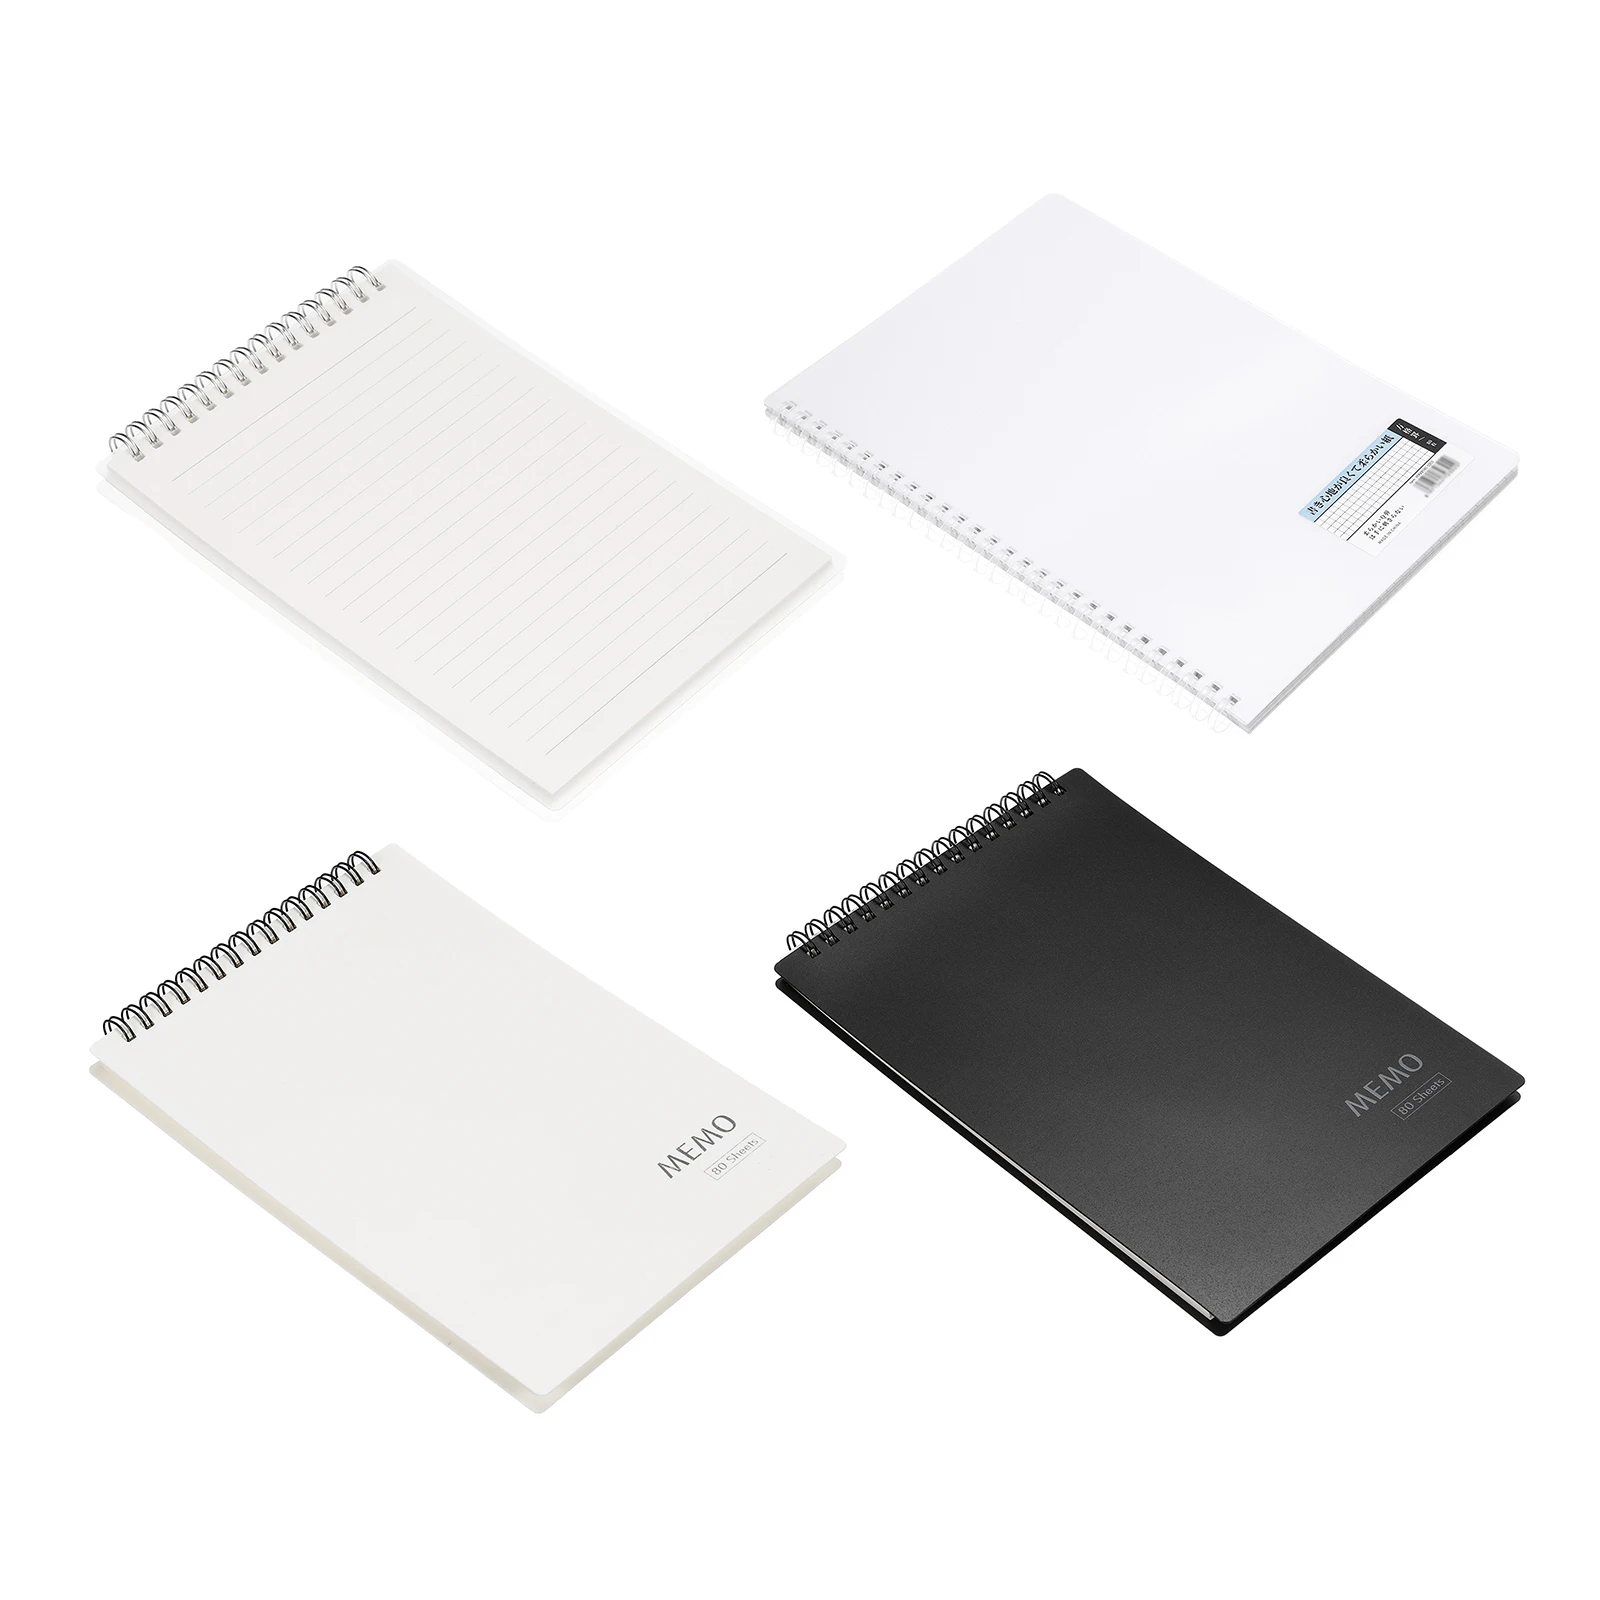 

A4 A5 B5 Spiral Book Coil Notebook To-Do Line Blank Grid Thick Paper Journal Diary Sketchbook For School Supplies Stationery